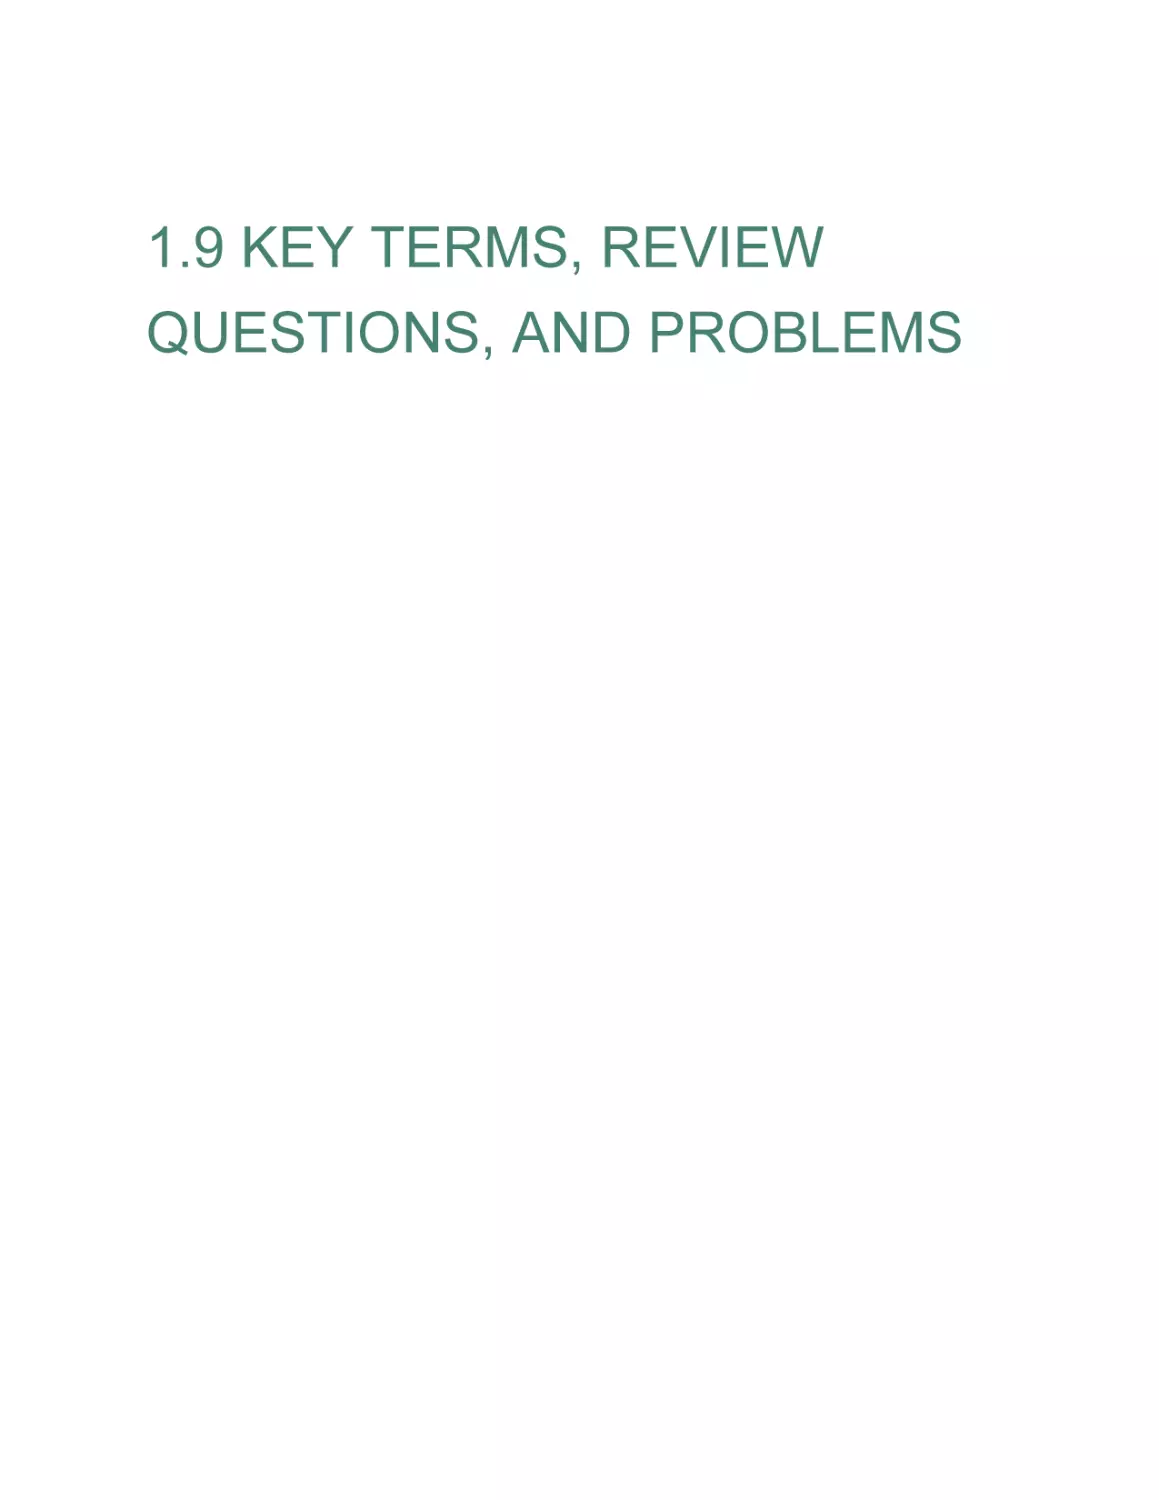 1.9 KEY TERMS, REVIEW QUESTIONS, AND PROBLEMS